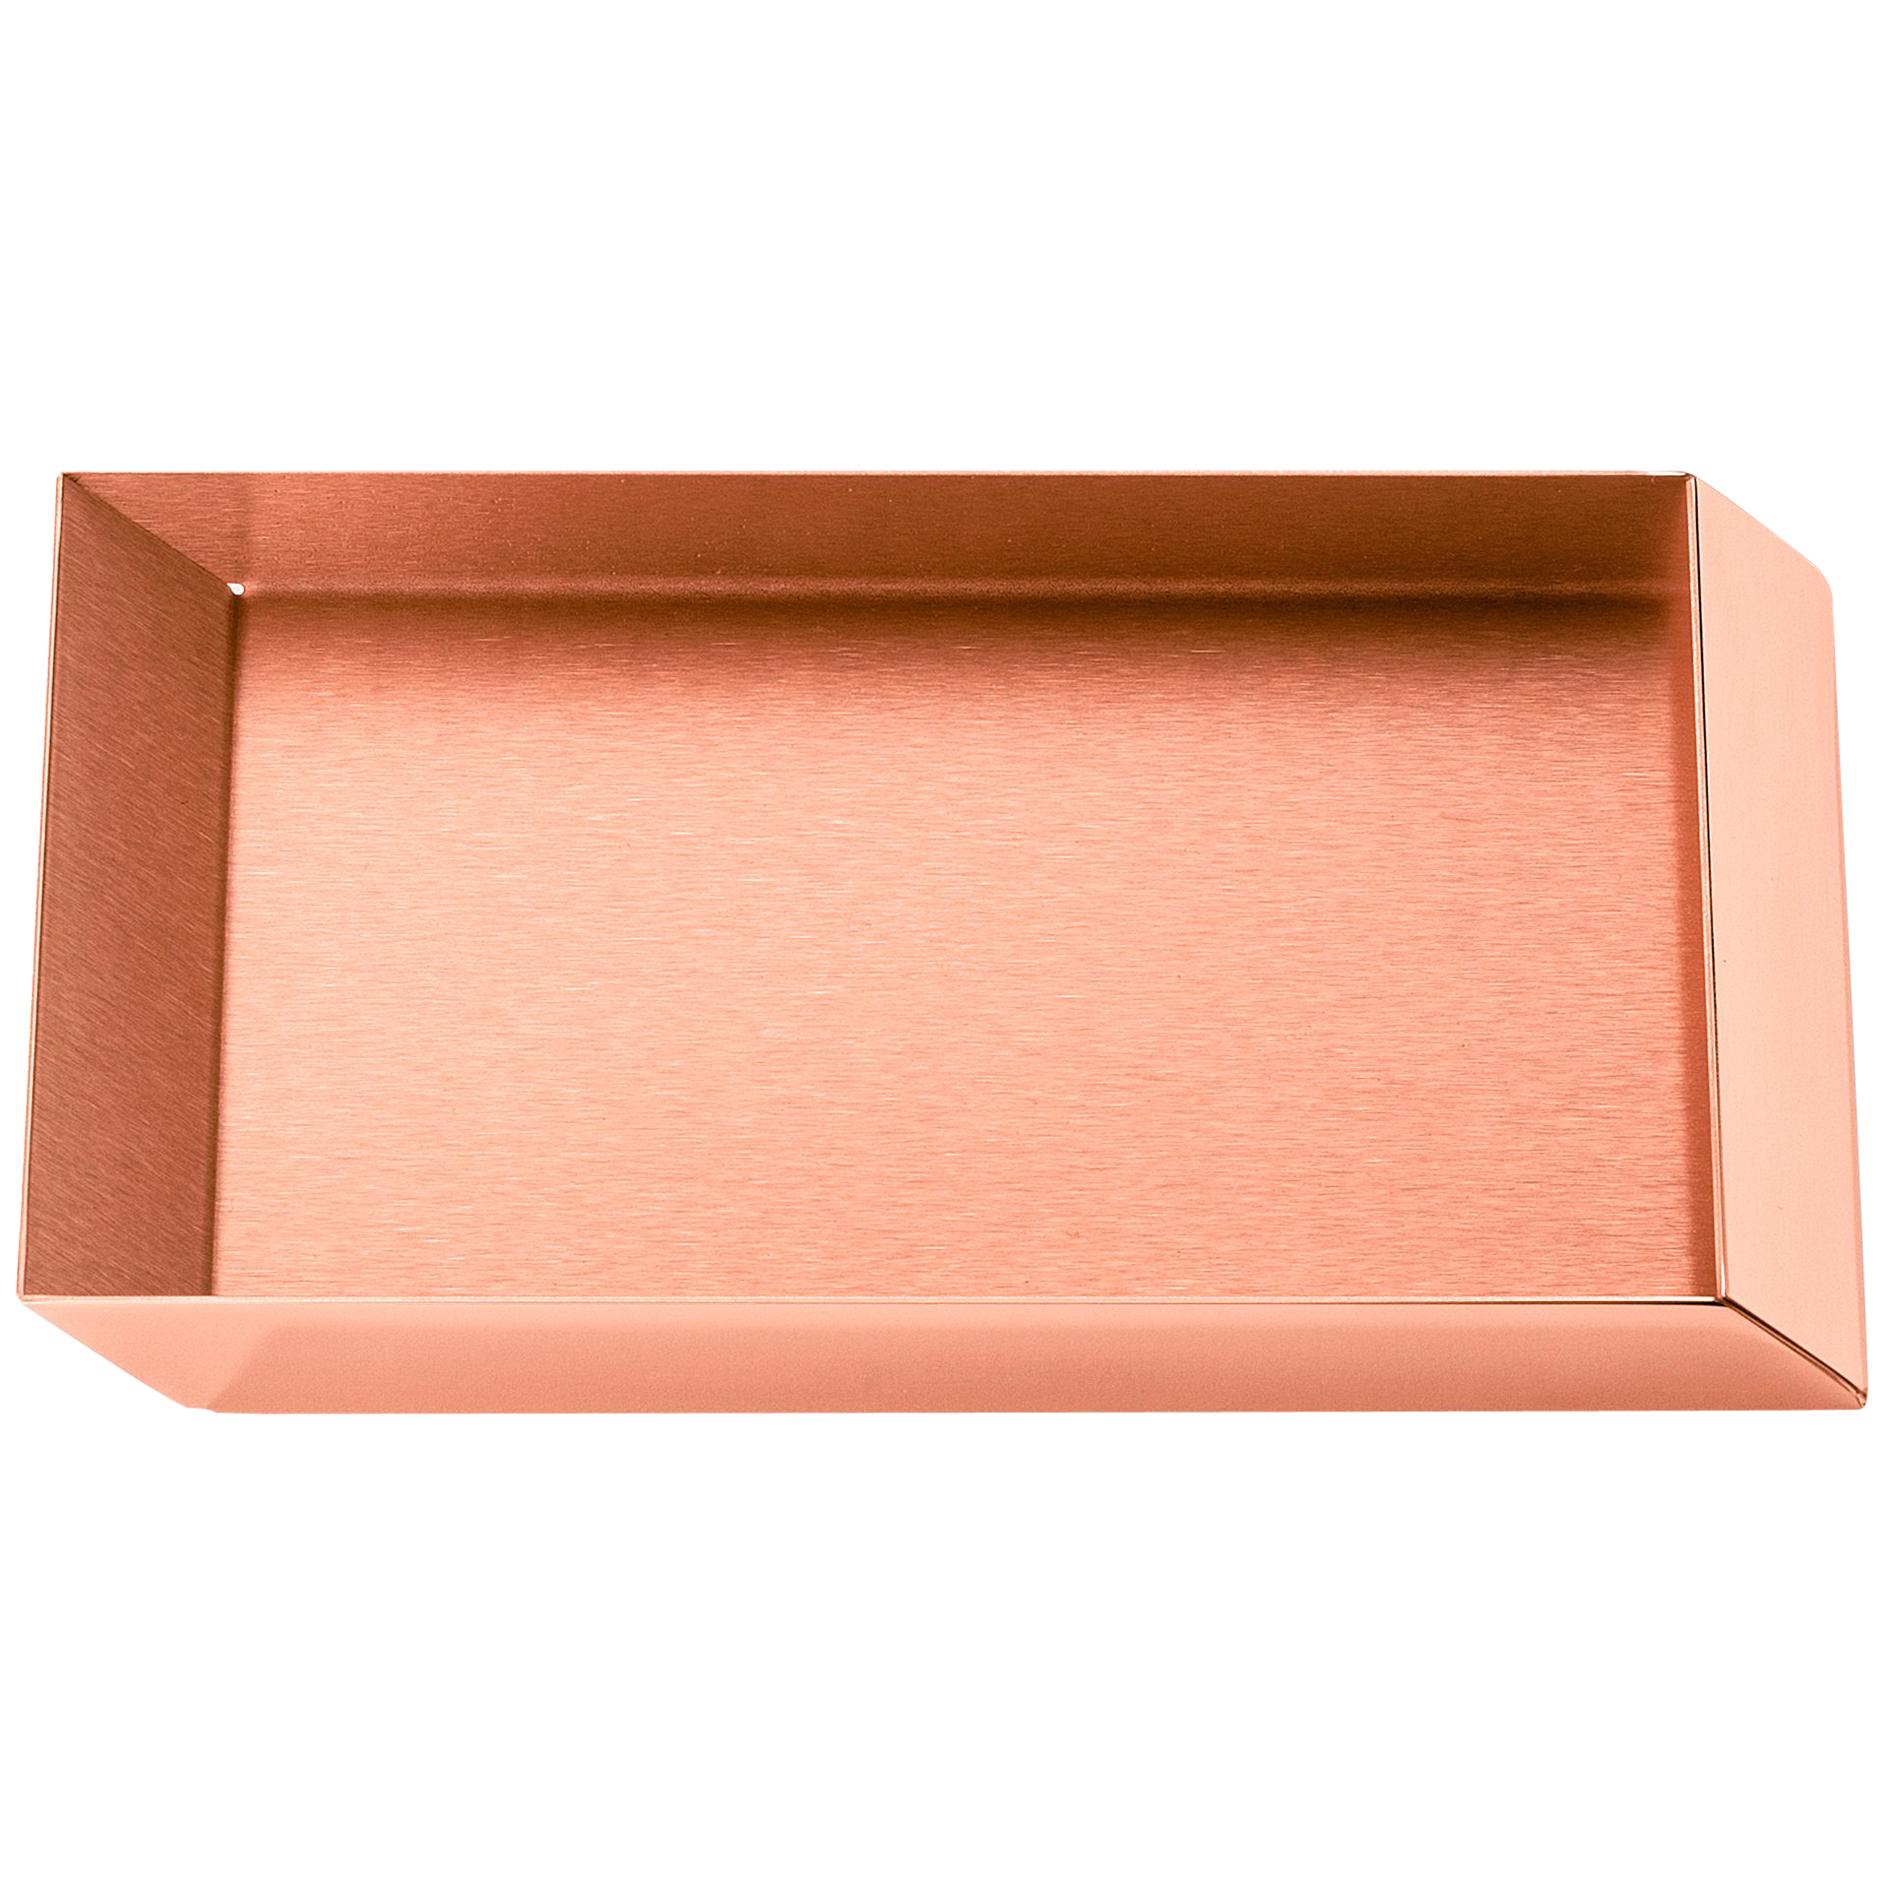 Ghidini 1961 Axonometry Small Rectangular Tray in Copper by Elisa Giovanni For Sale